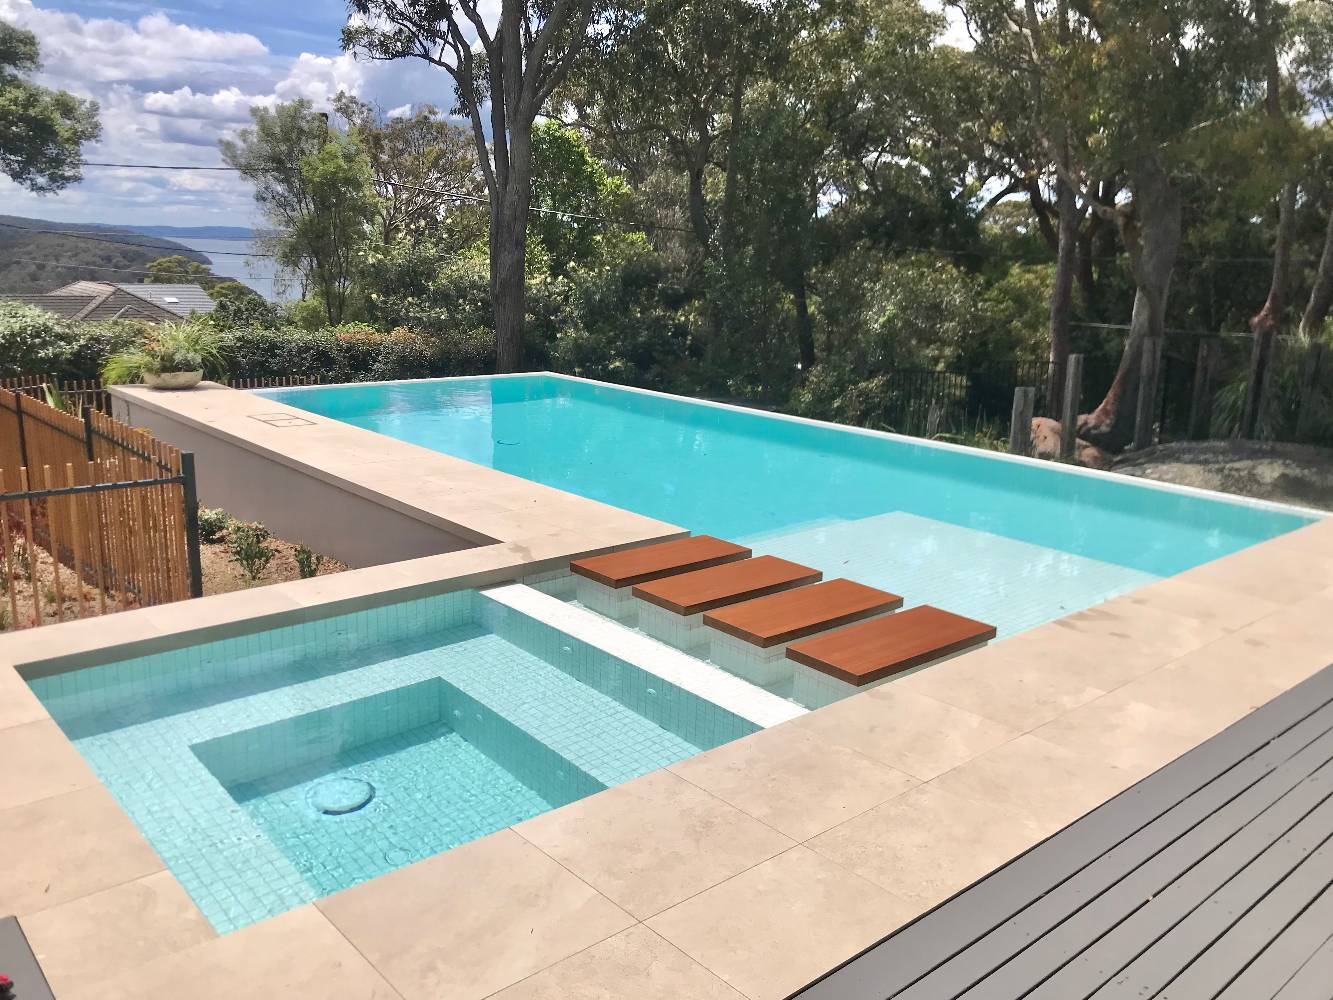 Brand new double infinity edge pool and spa.  Lovely all year round!